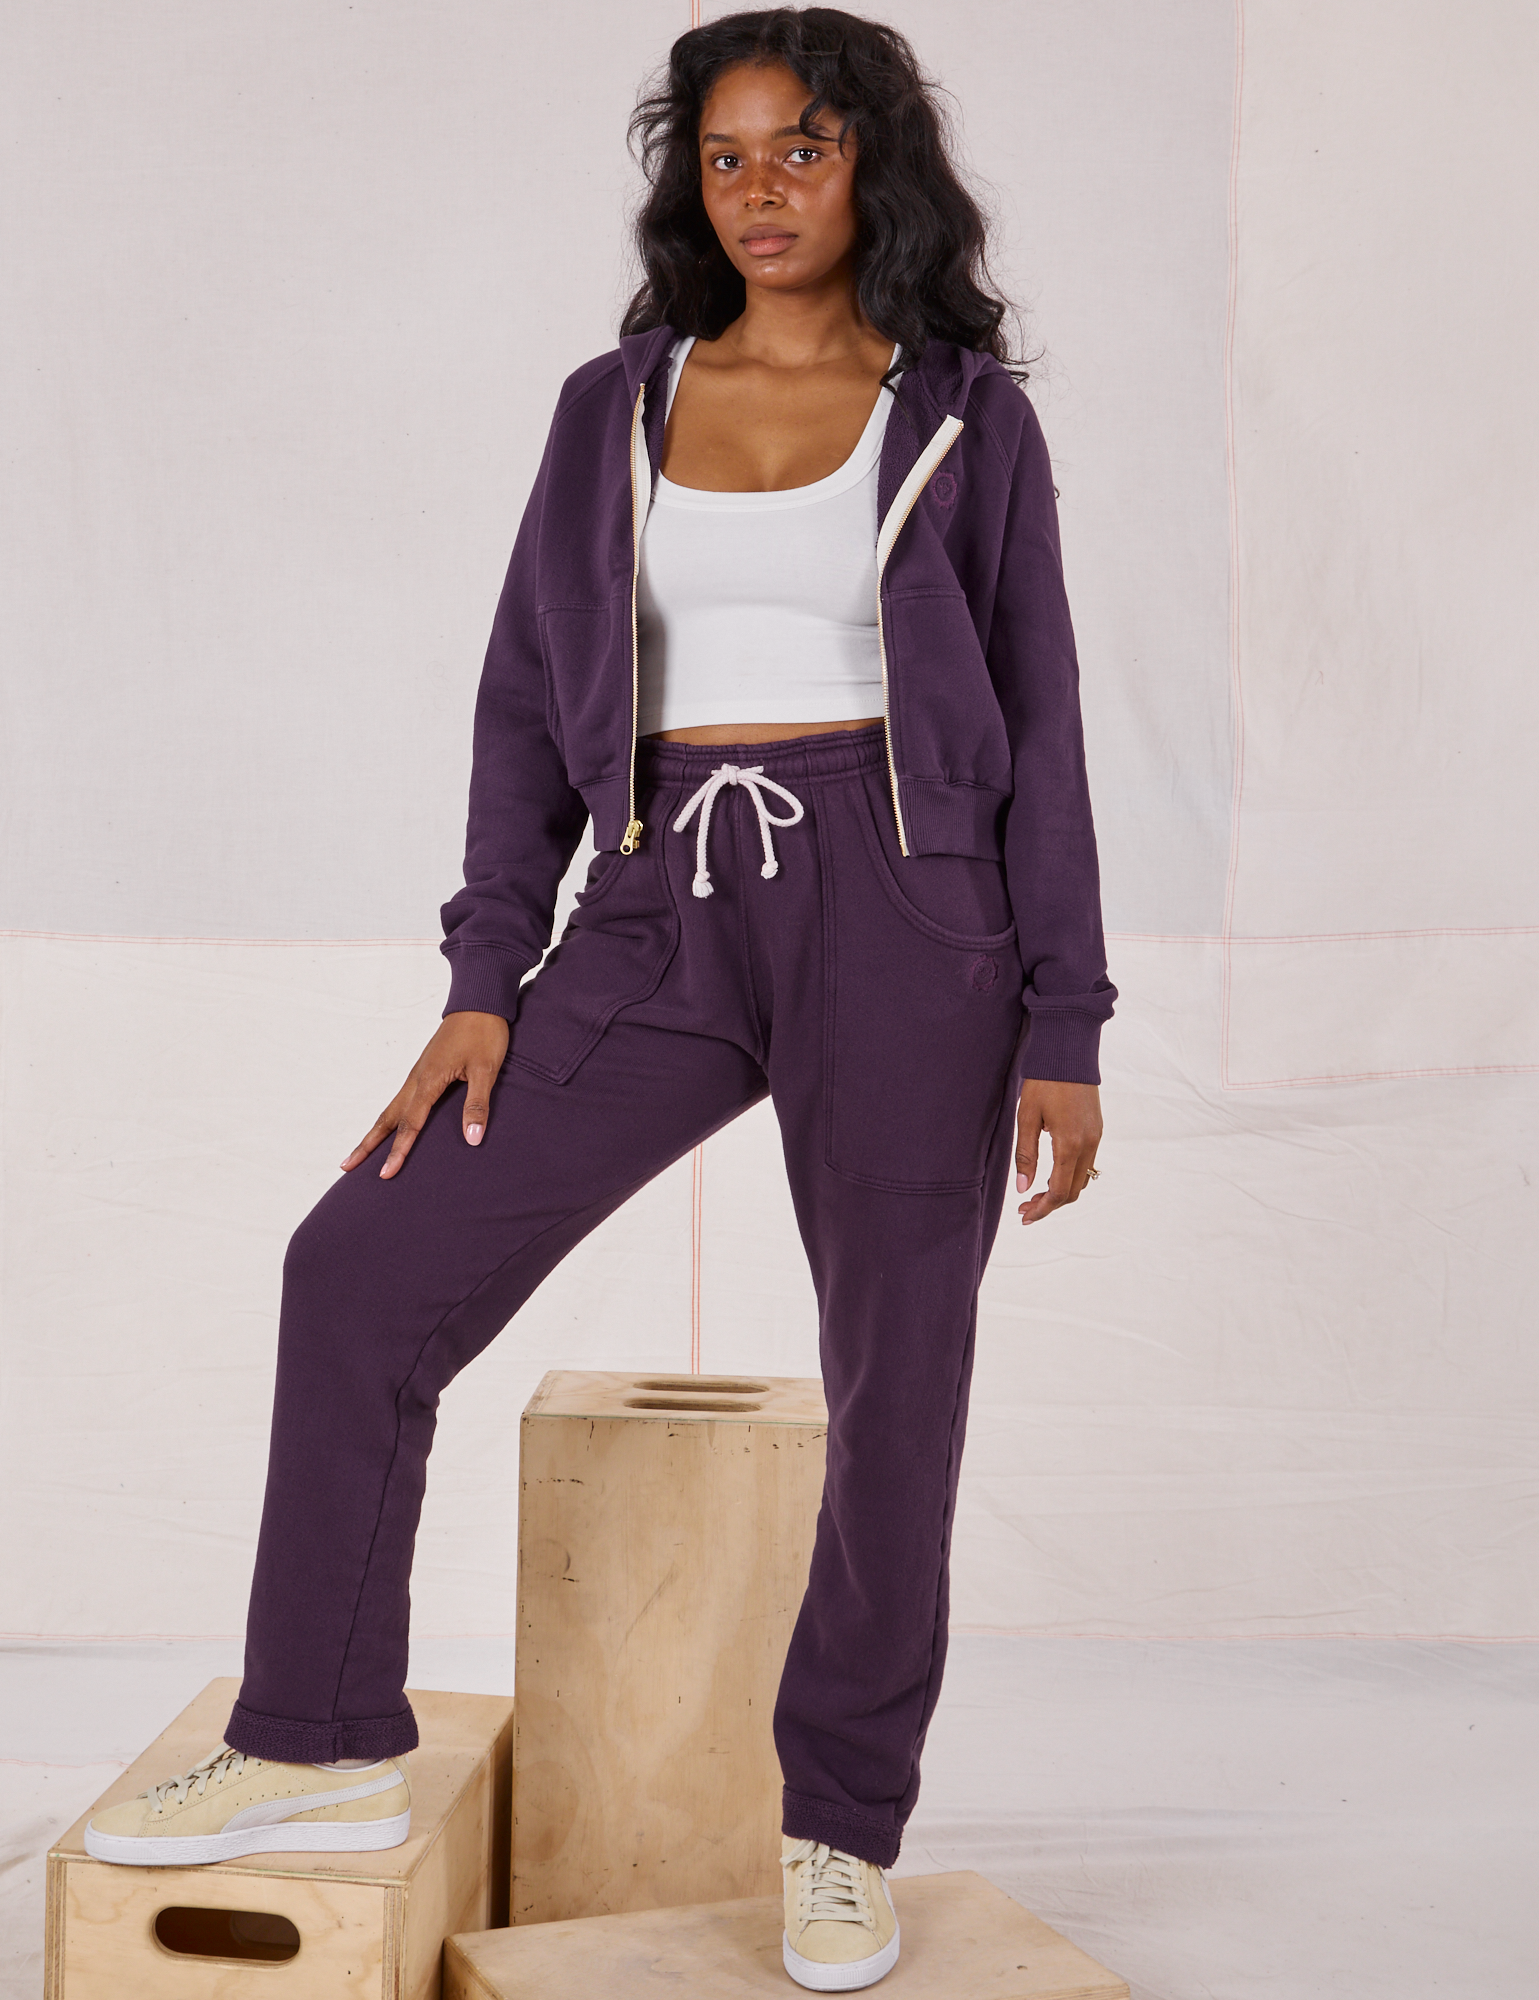 Kandia is 5&#39;3&quot; and wearing P Rolled Cuff Sweat Pants in Nebula Purple paired with matching Cropped Zip Hoodie and a Cropped Tank in vintage tee off-white underneath